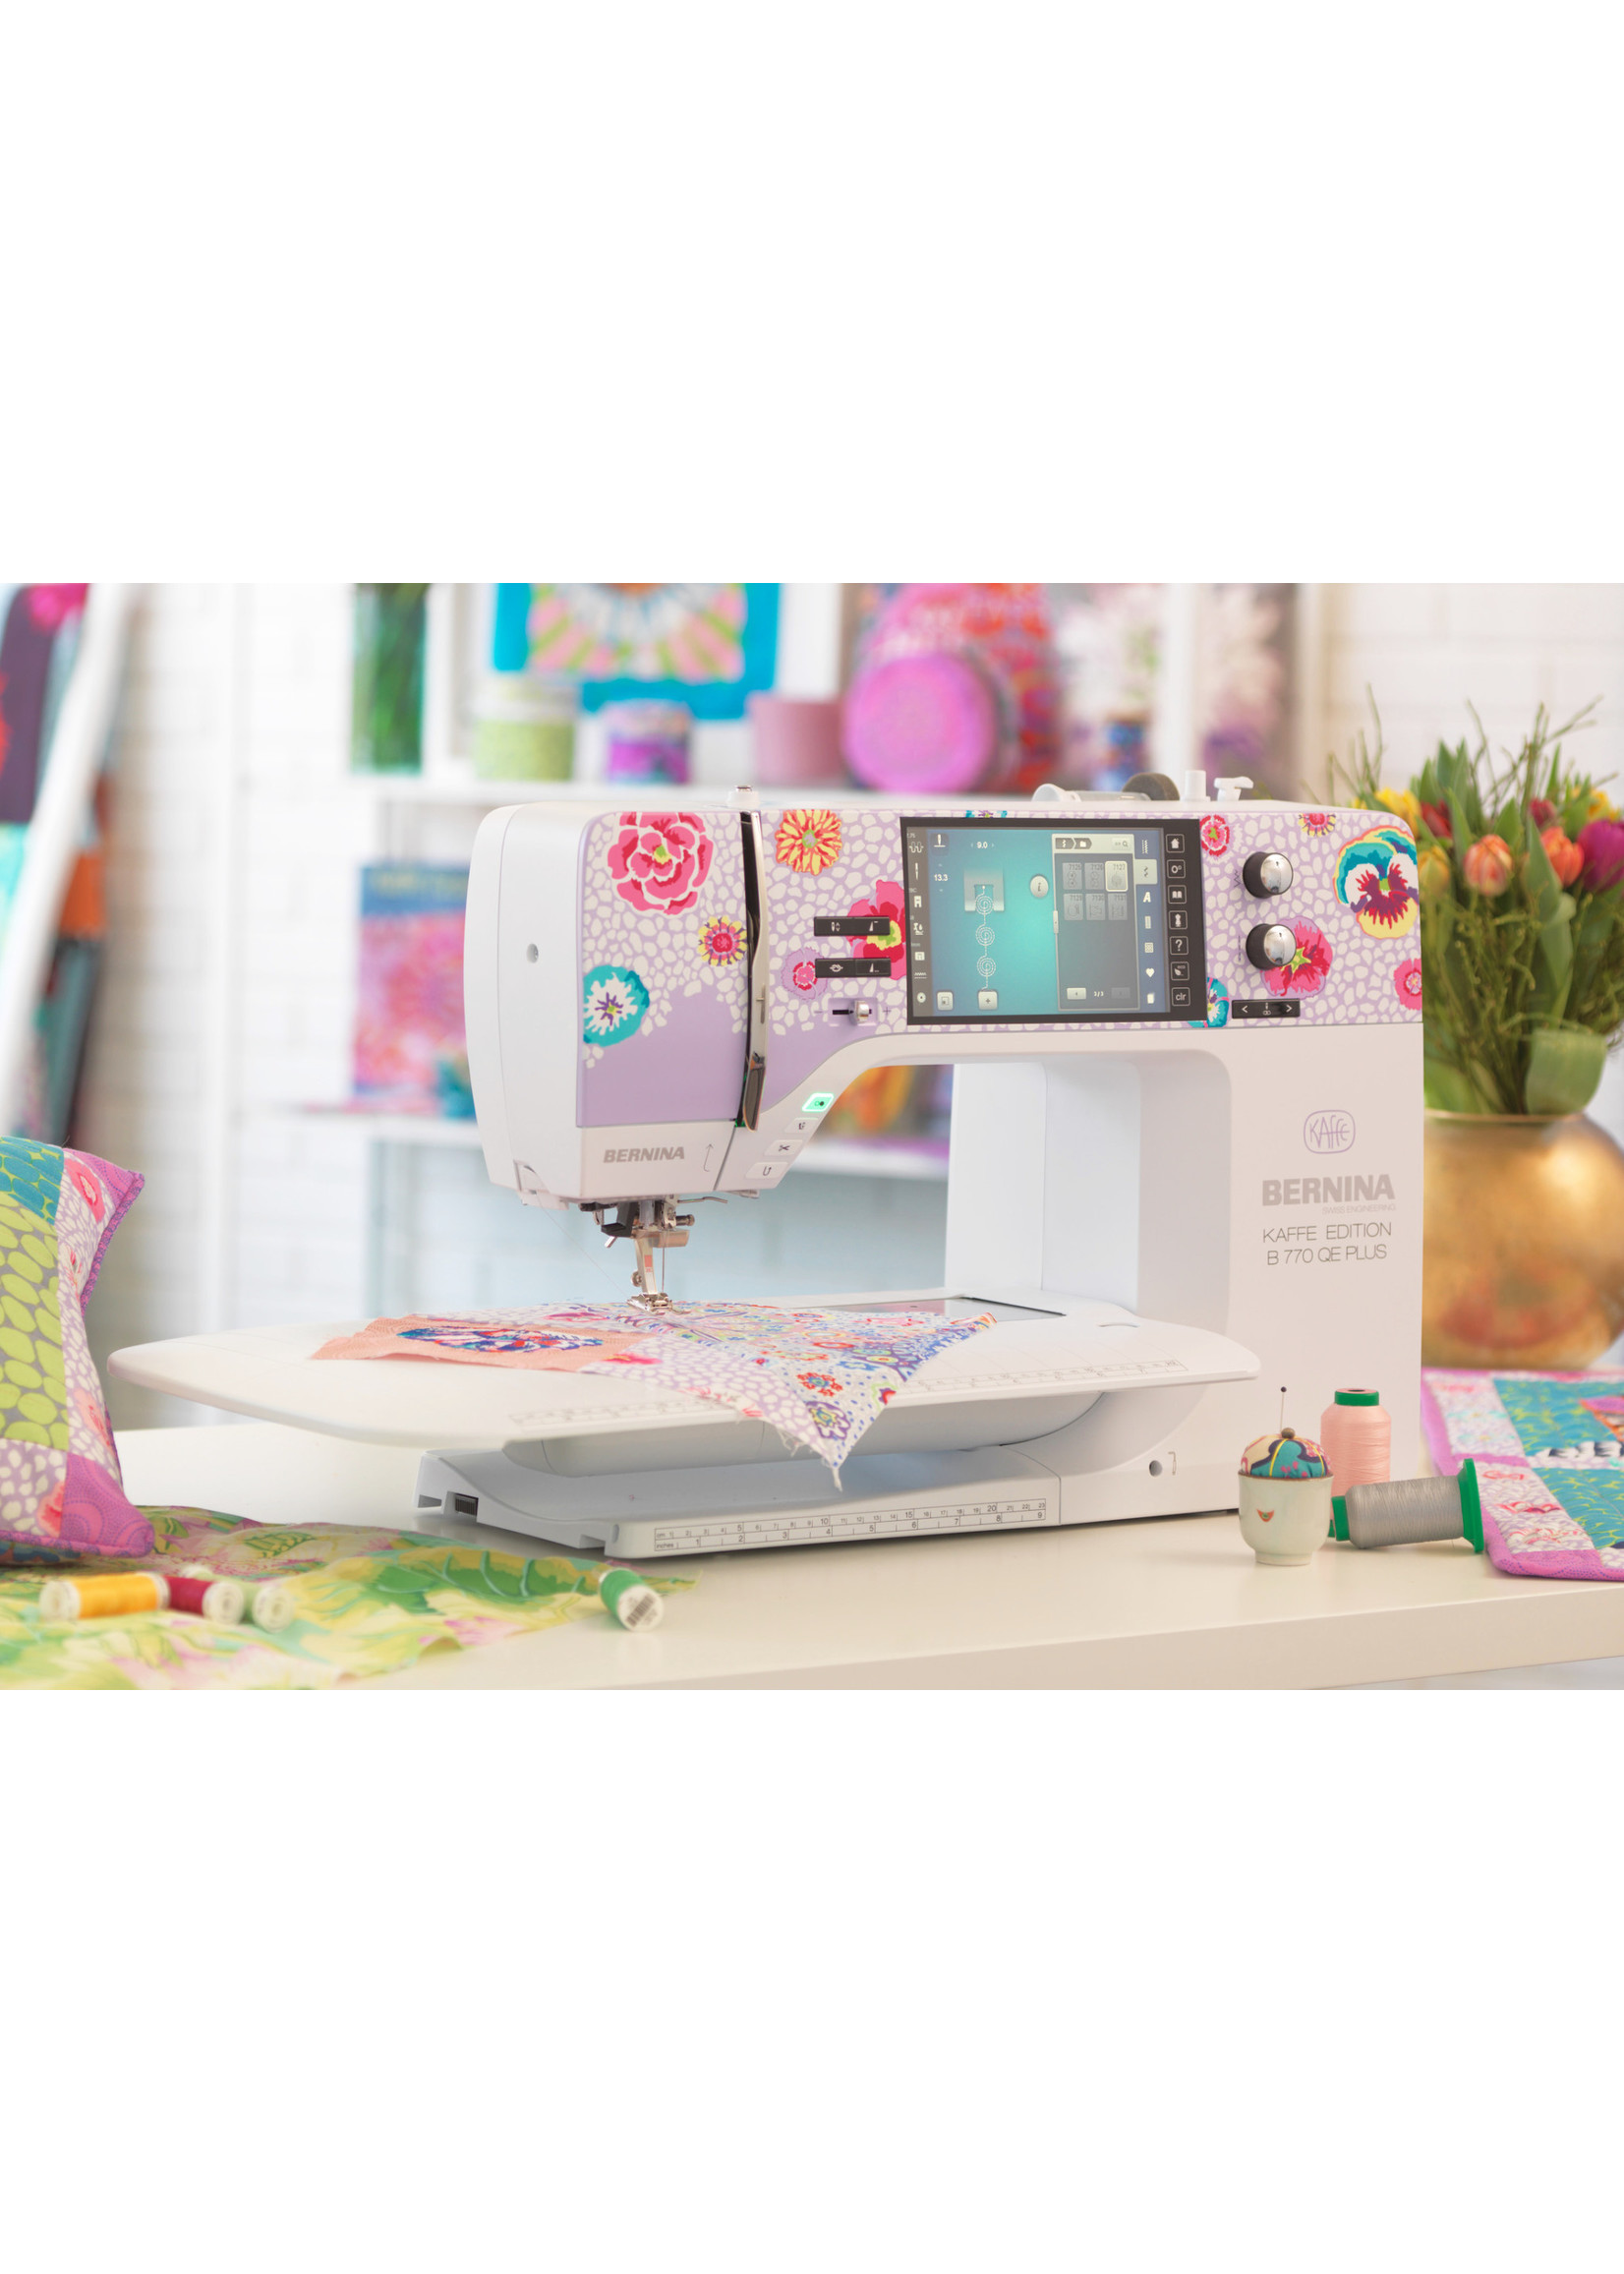 Bernina Bernina 770 QE PLUS Kaffe Edition - AVAILABLE FOR IN-STORE PURCHASE ONLY